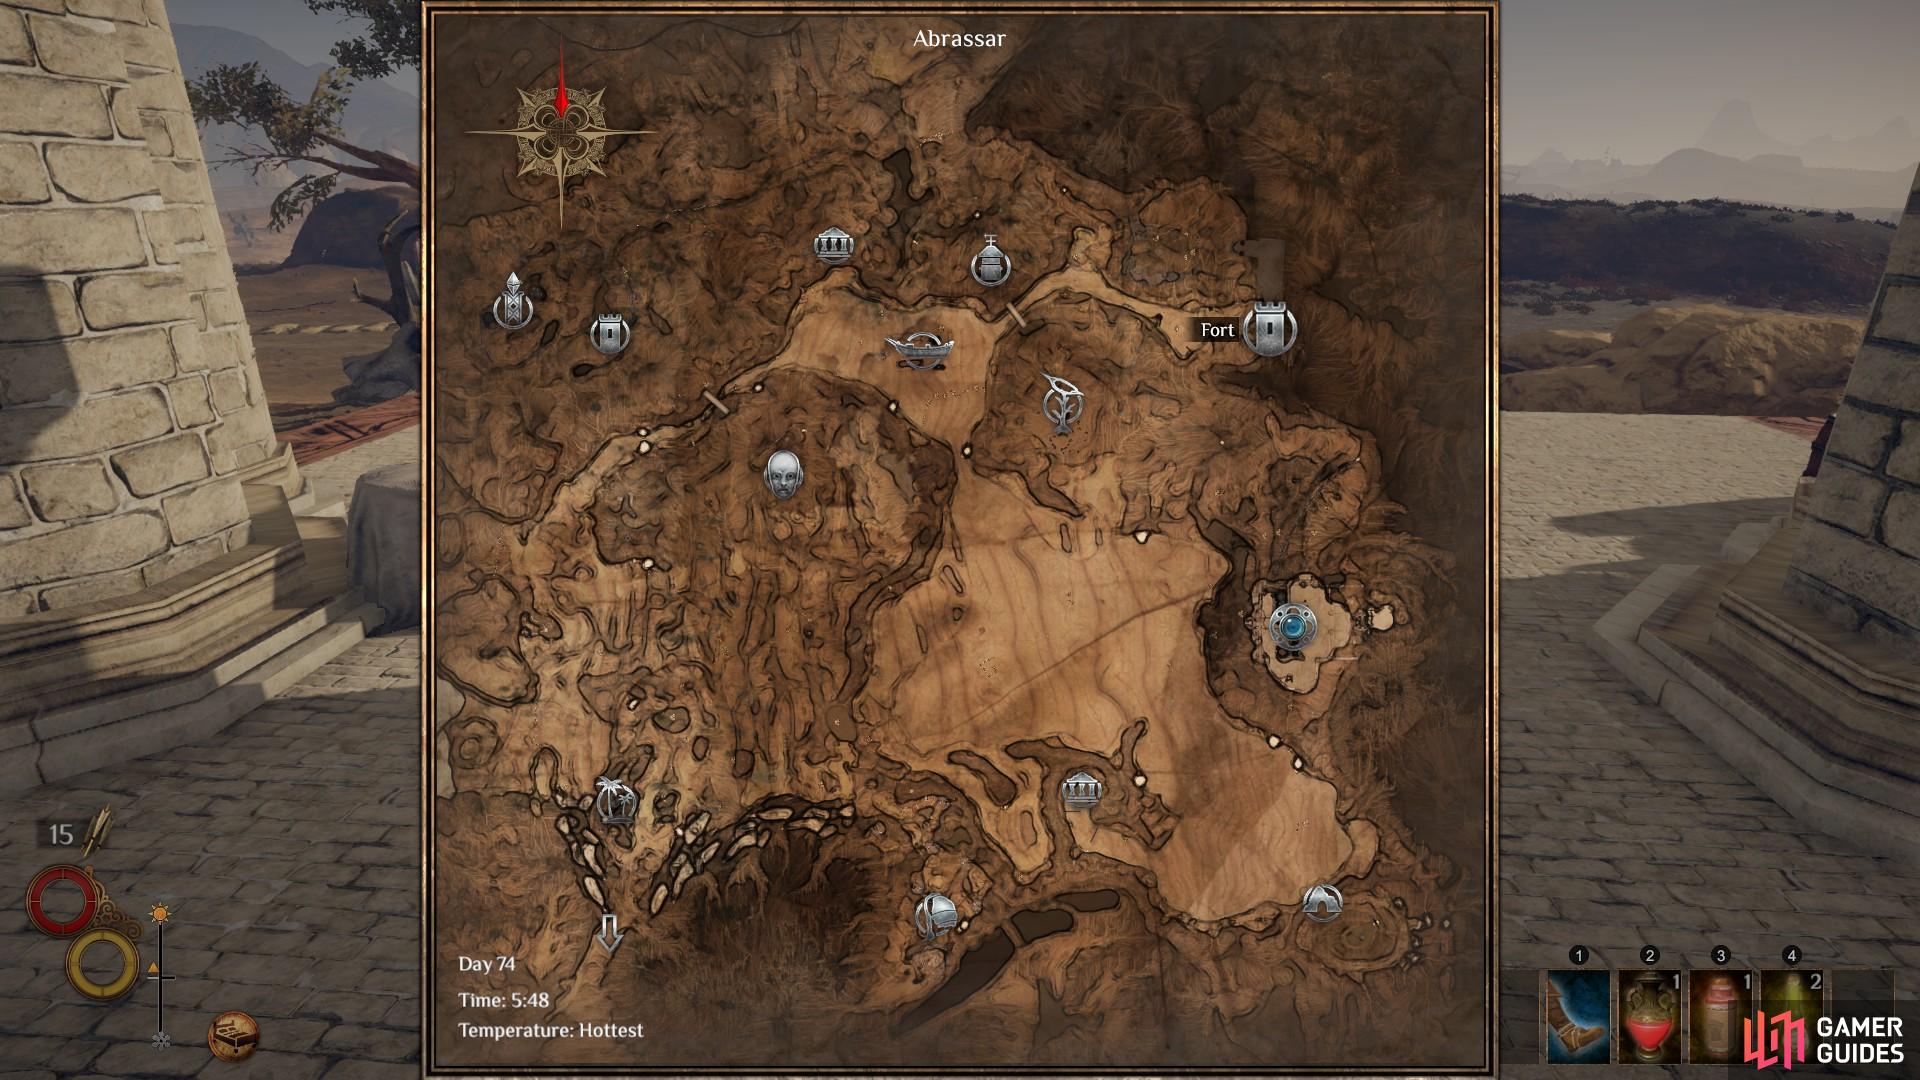 The location of Electric Lab on the Abrassar map, marked here as Fort in the north east of the map.